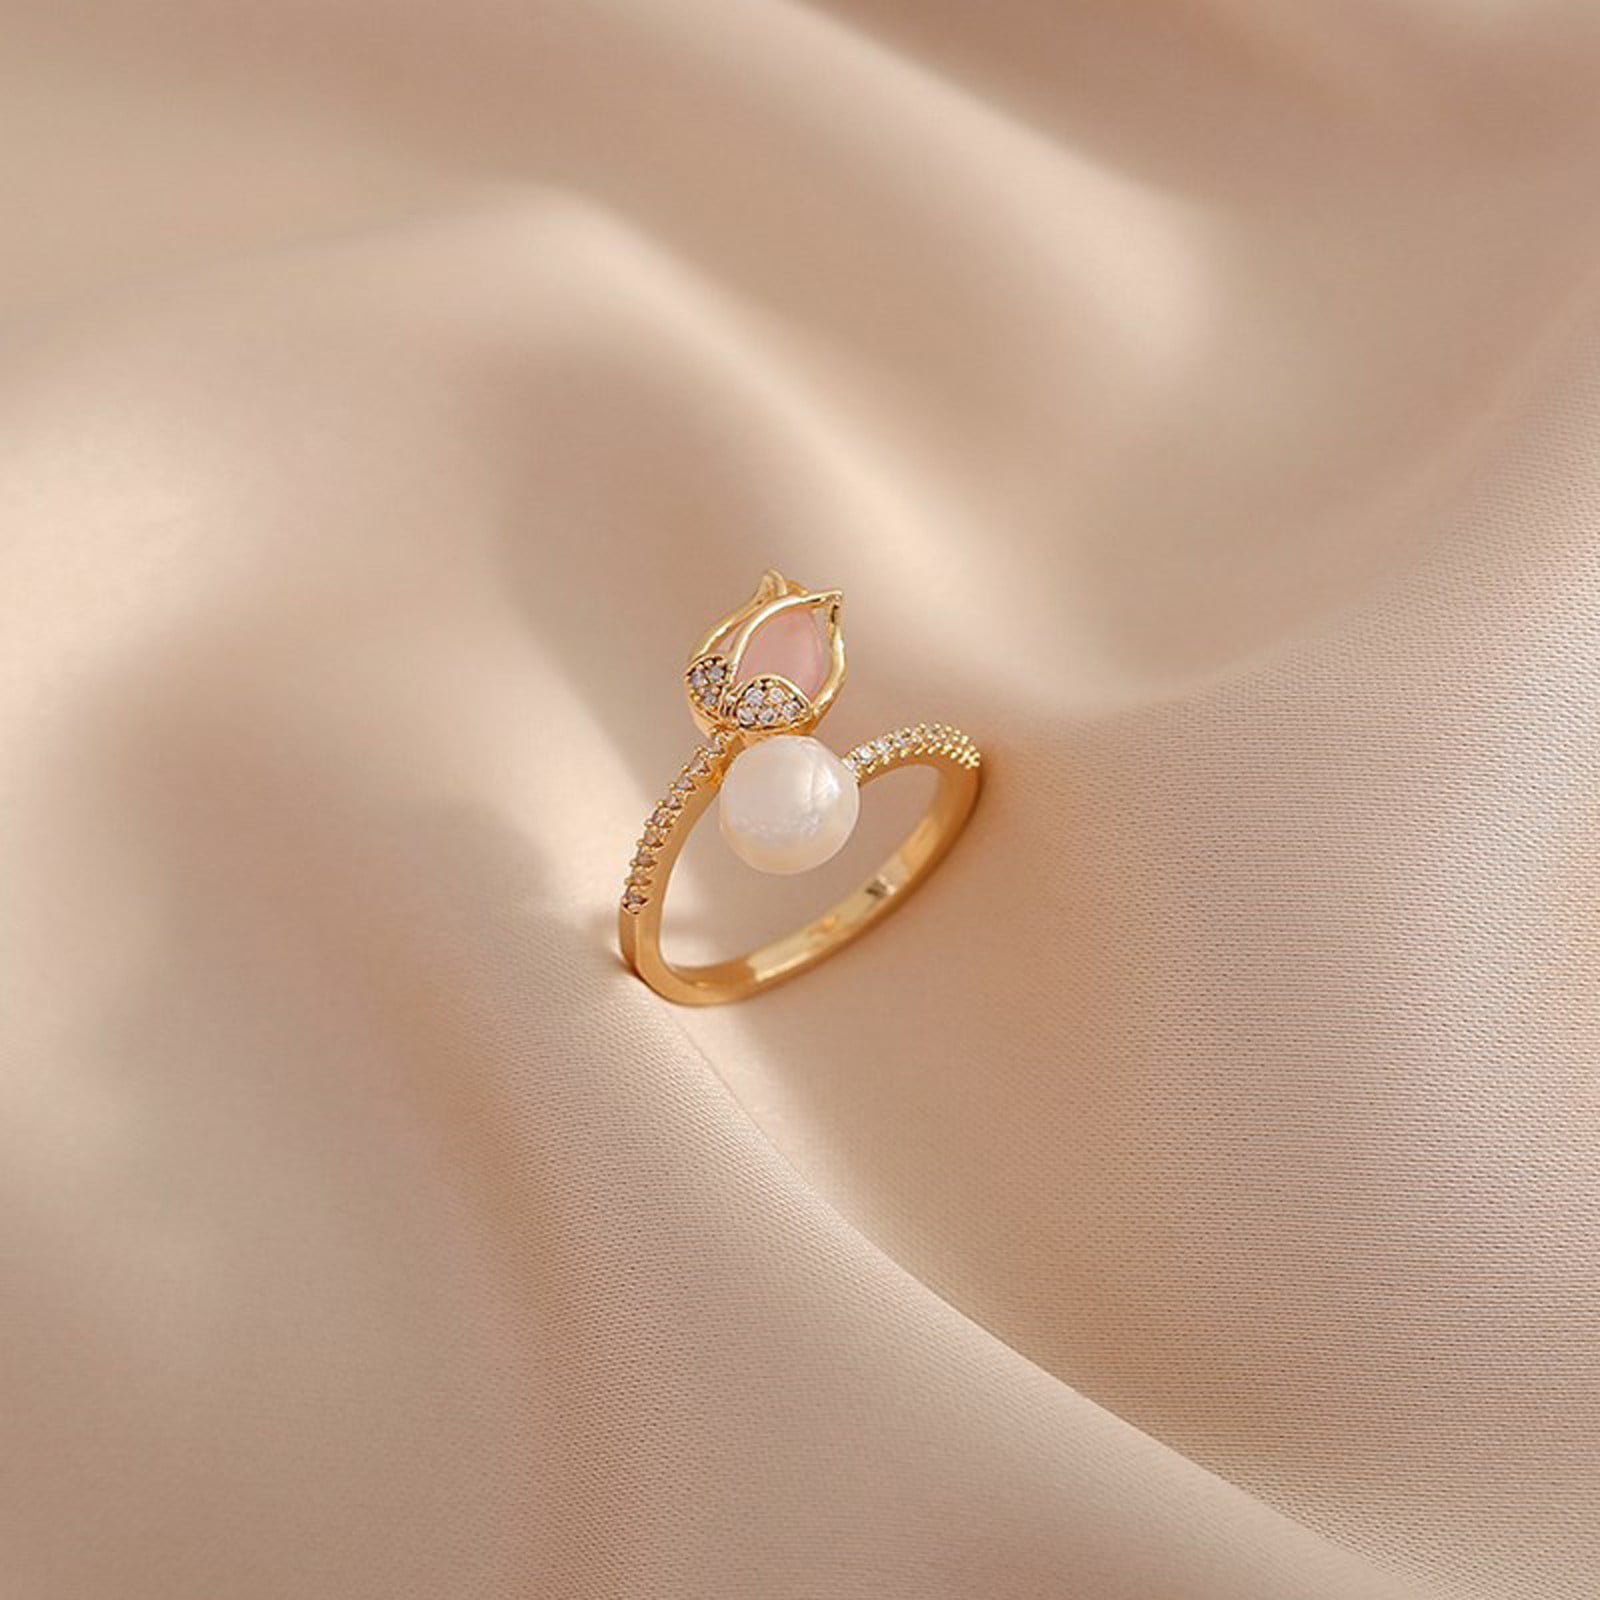 Pearl and Diamond Engagement Ring set in Gold with Diamonds